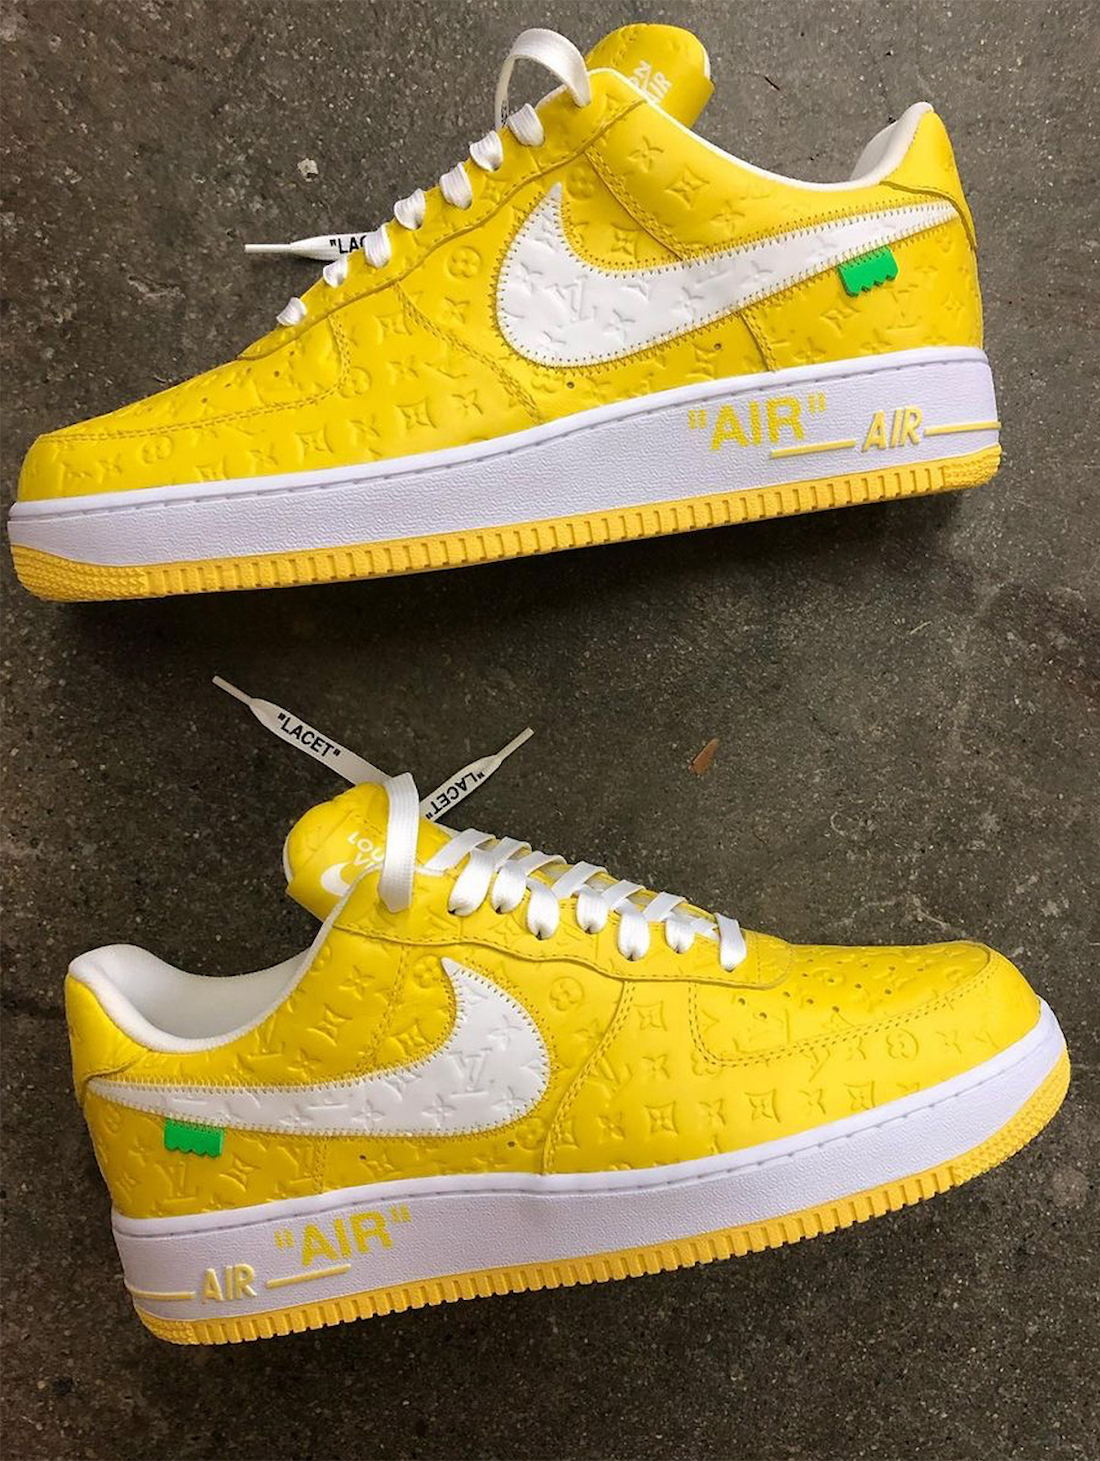 Louis Vuitton Nike Air Force 1 Yellow Release Date